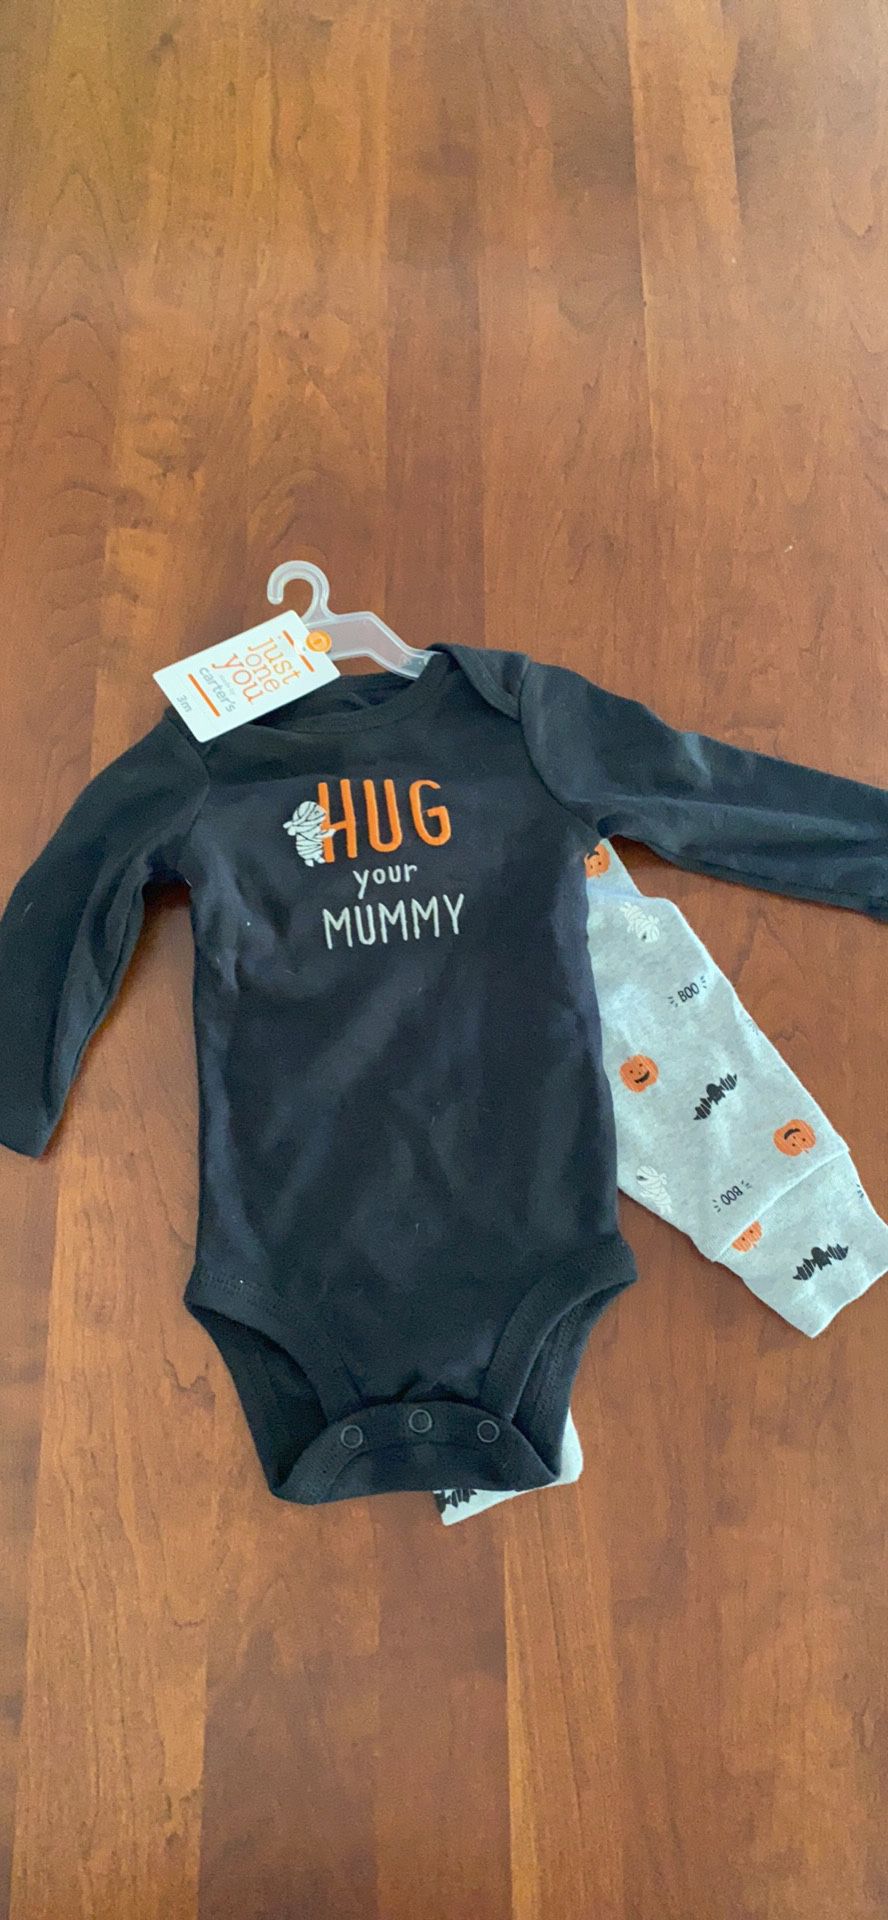 Carter’s Halloween outfit 3 months - “hug your mummy” new with tags